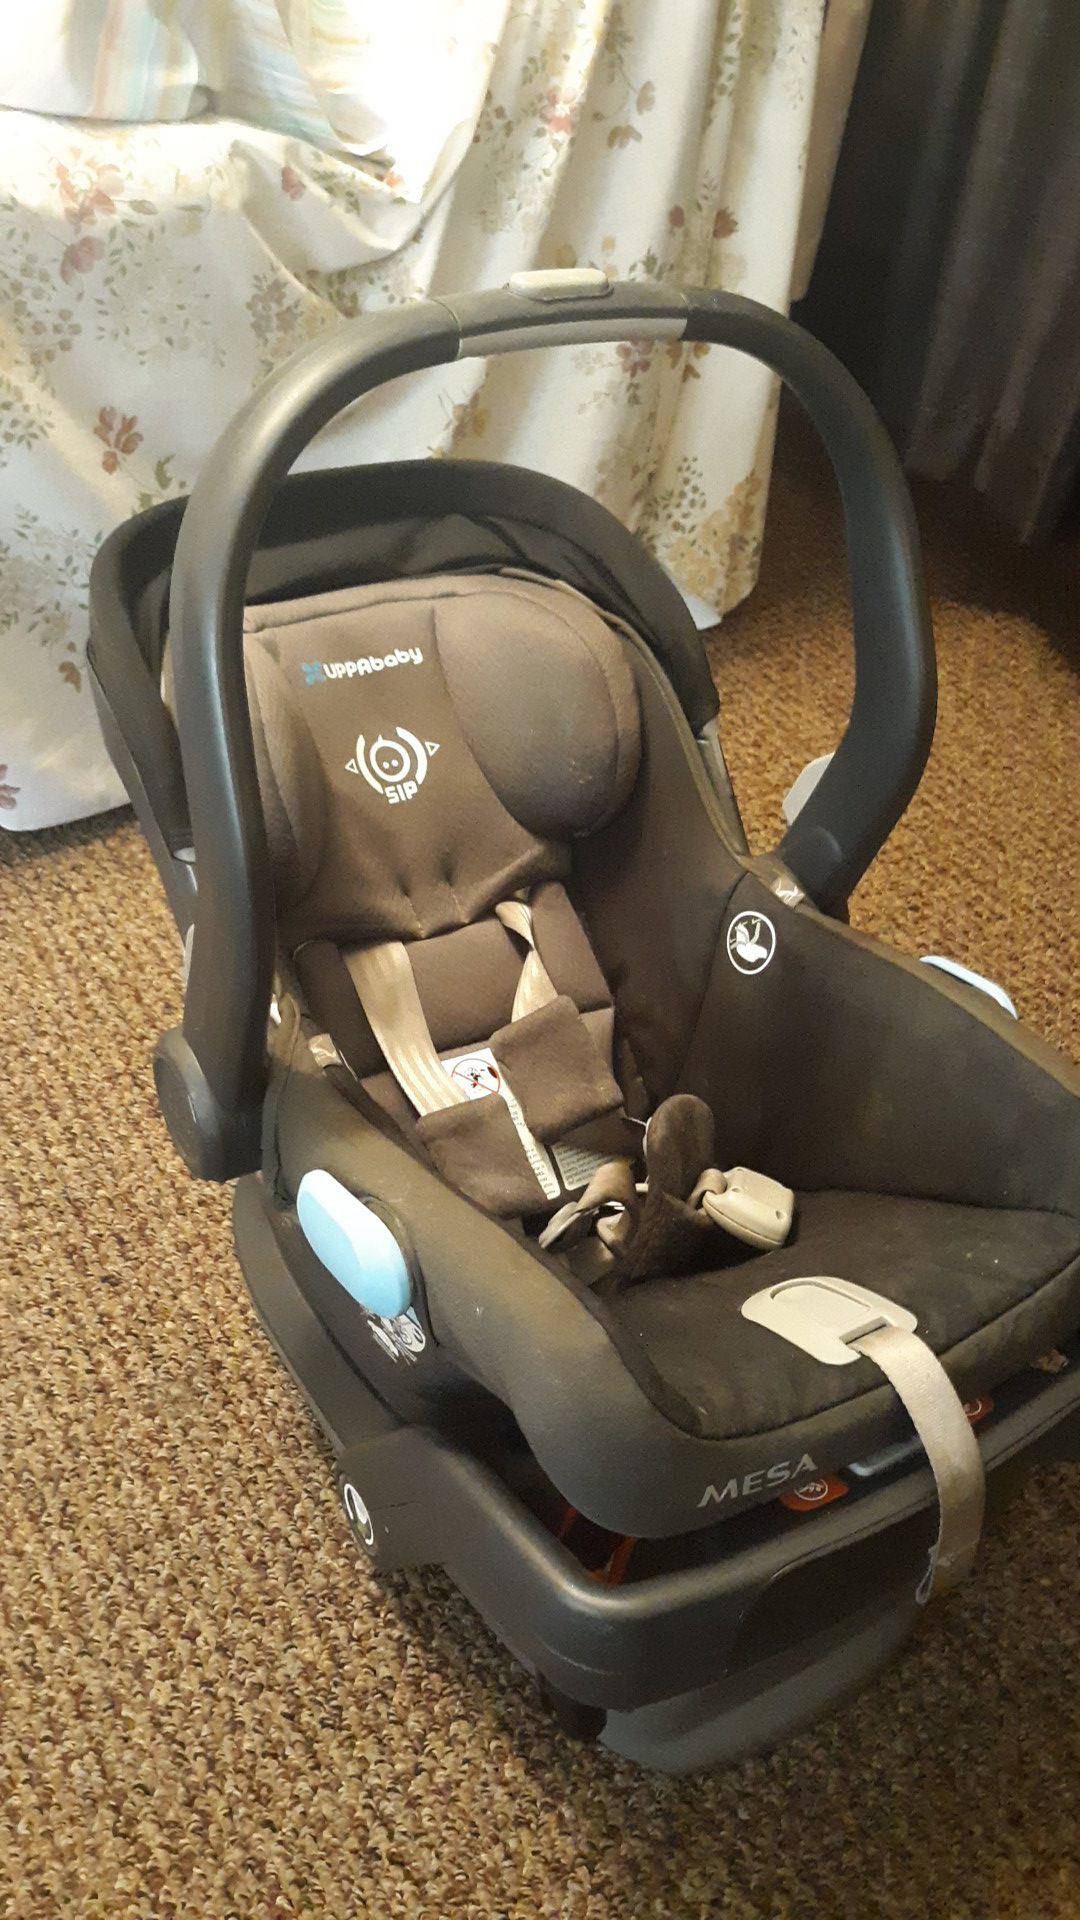 Uppababy car seat and carrier in great condition cost 129.00 sell for 25$